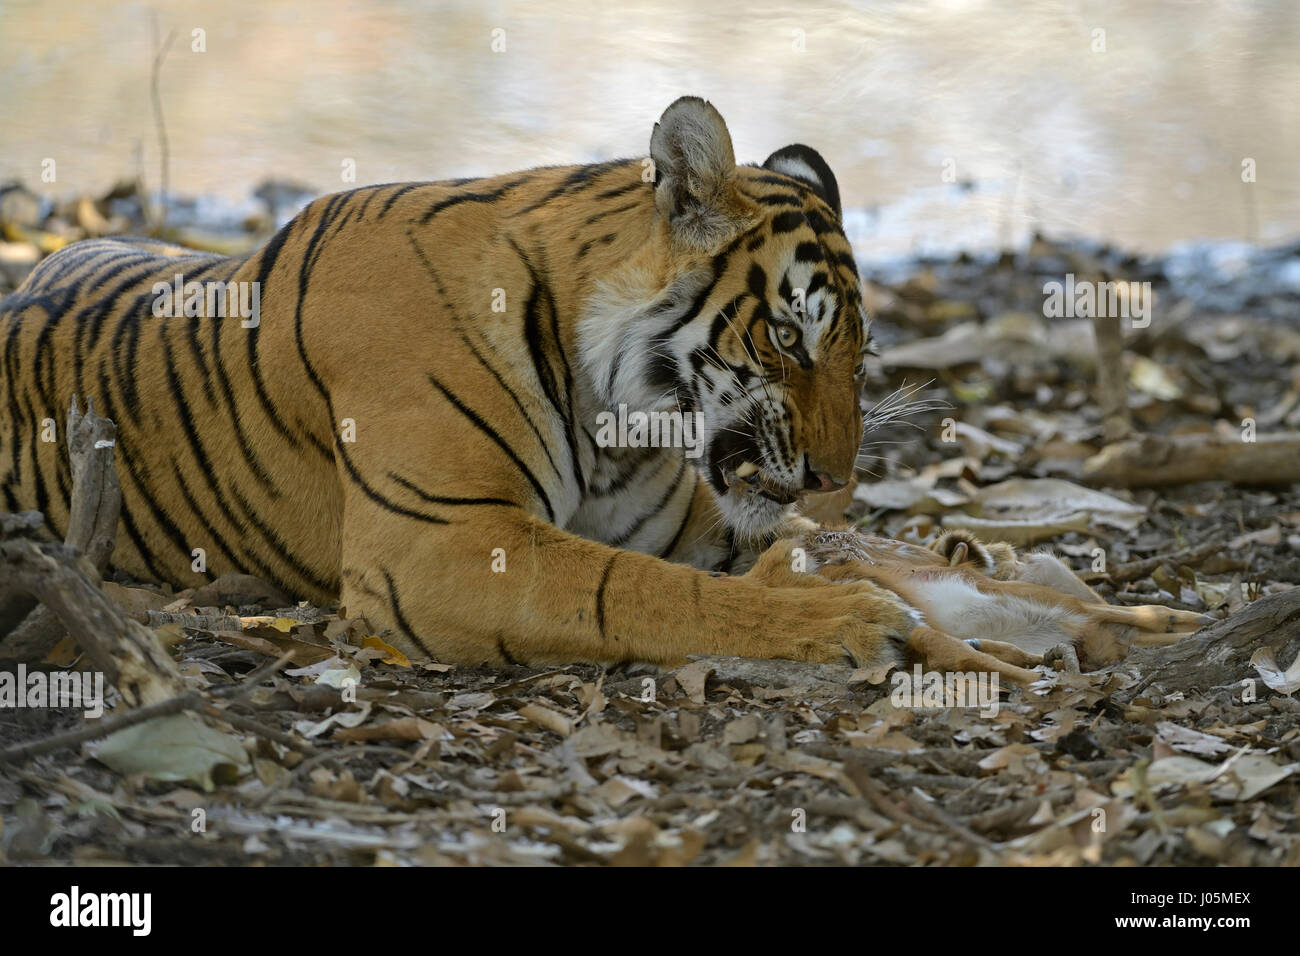 Close up of a wild Bengal tiger eating a dead Spotted or Axis deer calf in her mouth in Ranthambhore tiger reserve of India Stock Photo